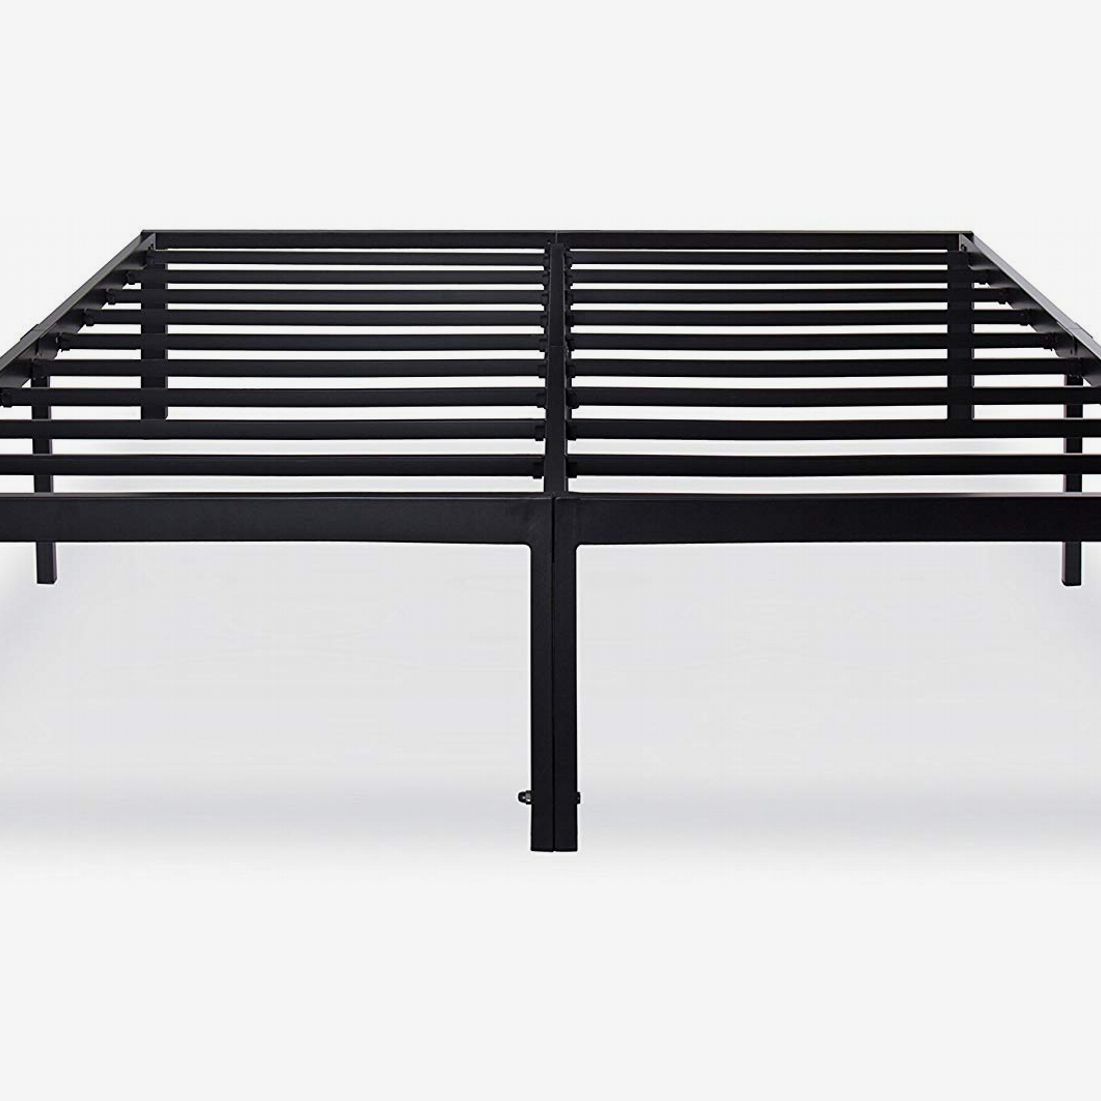 19 Best Metal Bed Frames 2022 The, Can You Put Slats On A Metal Bed Frame